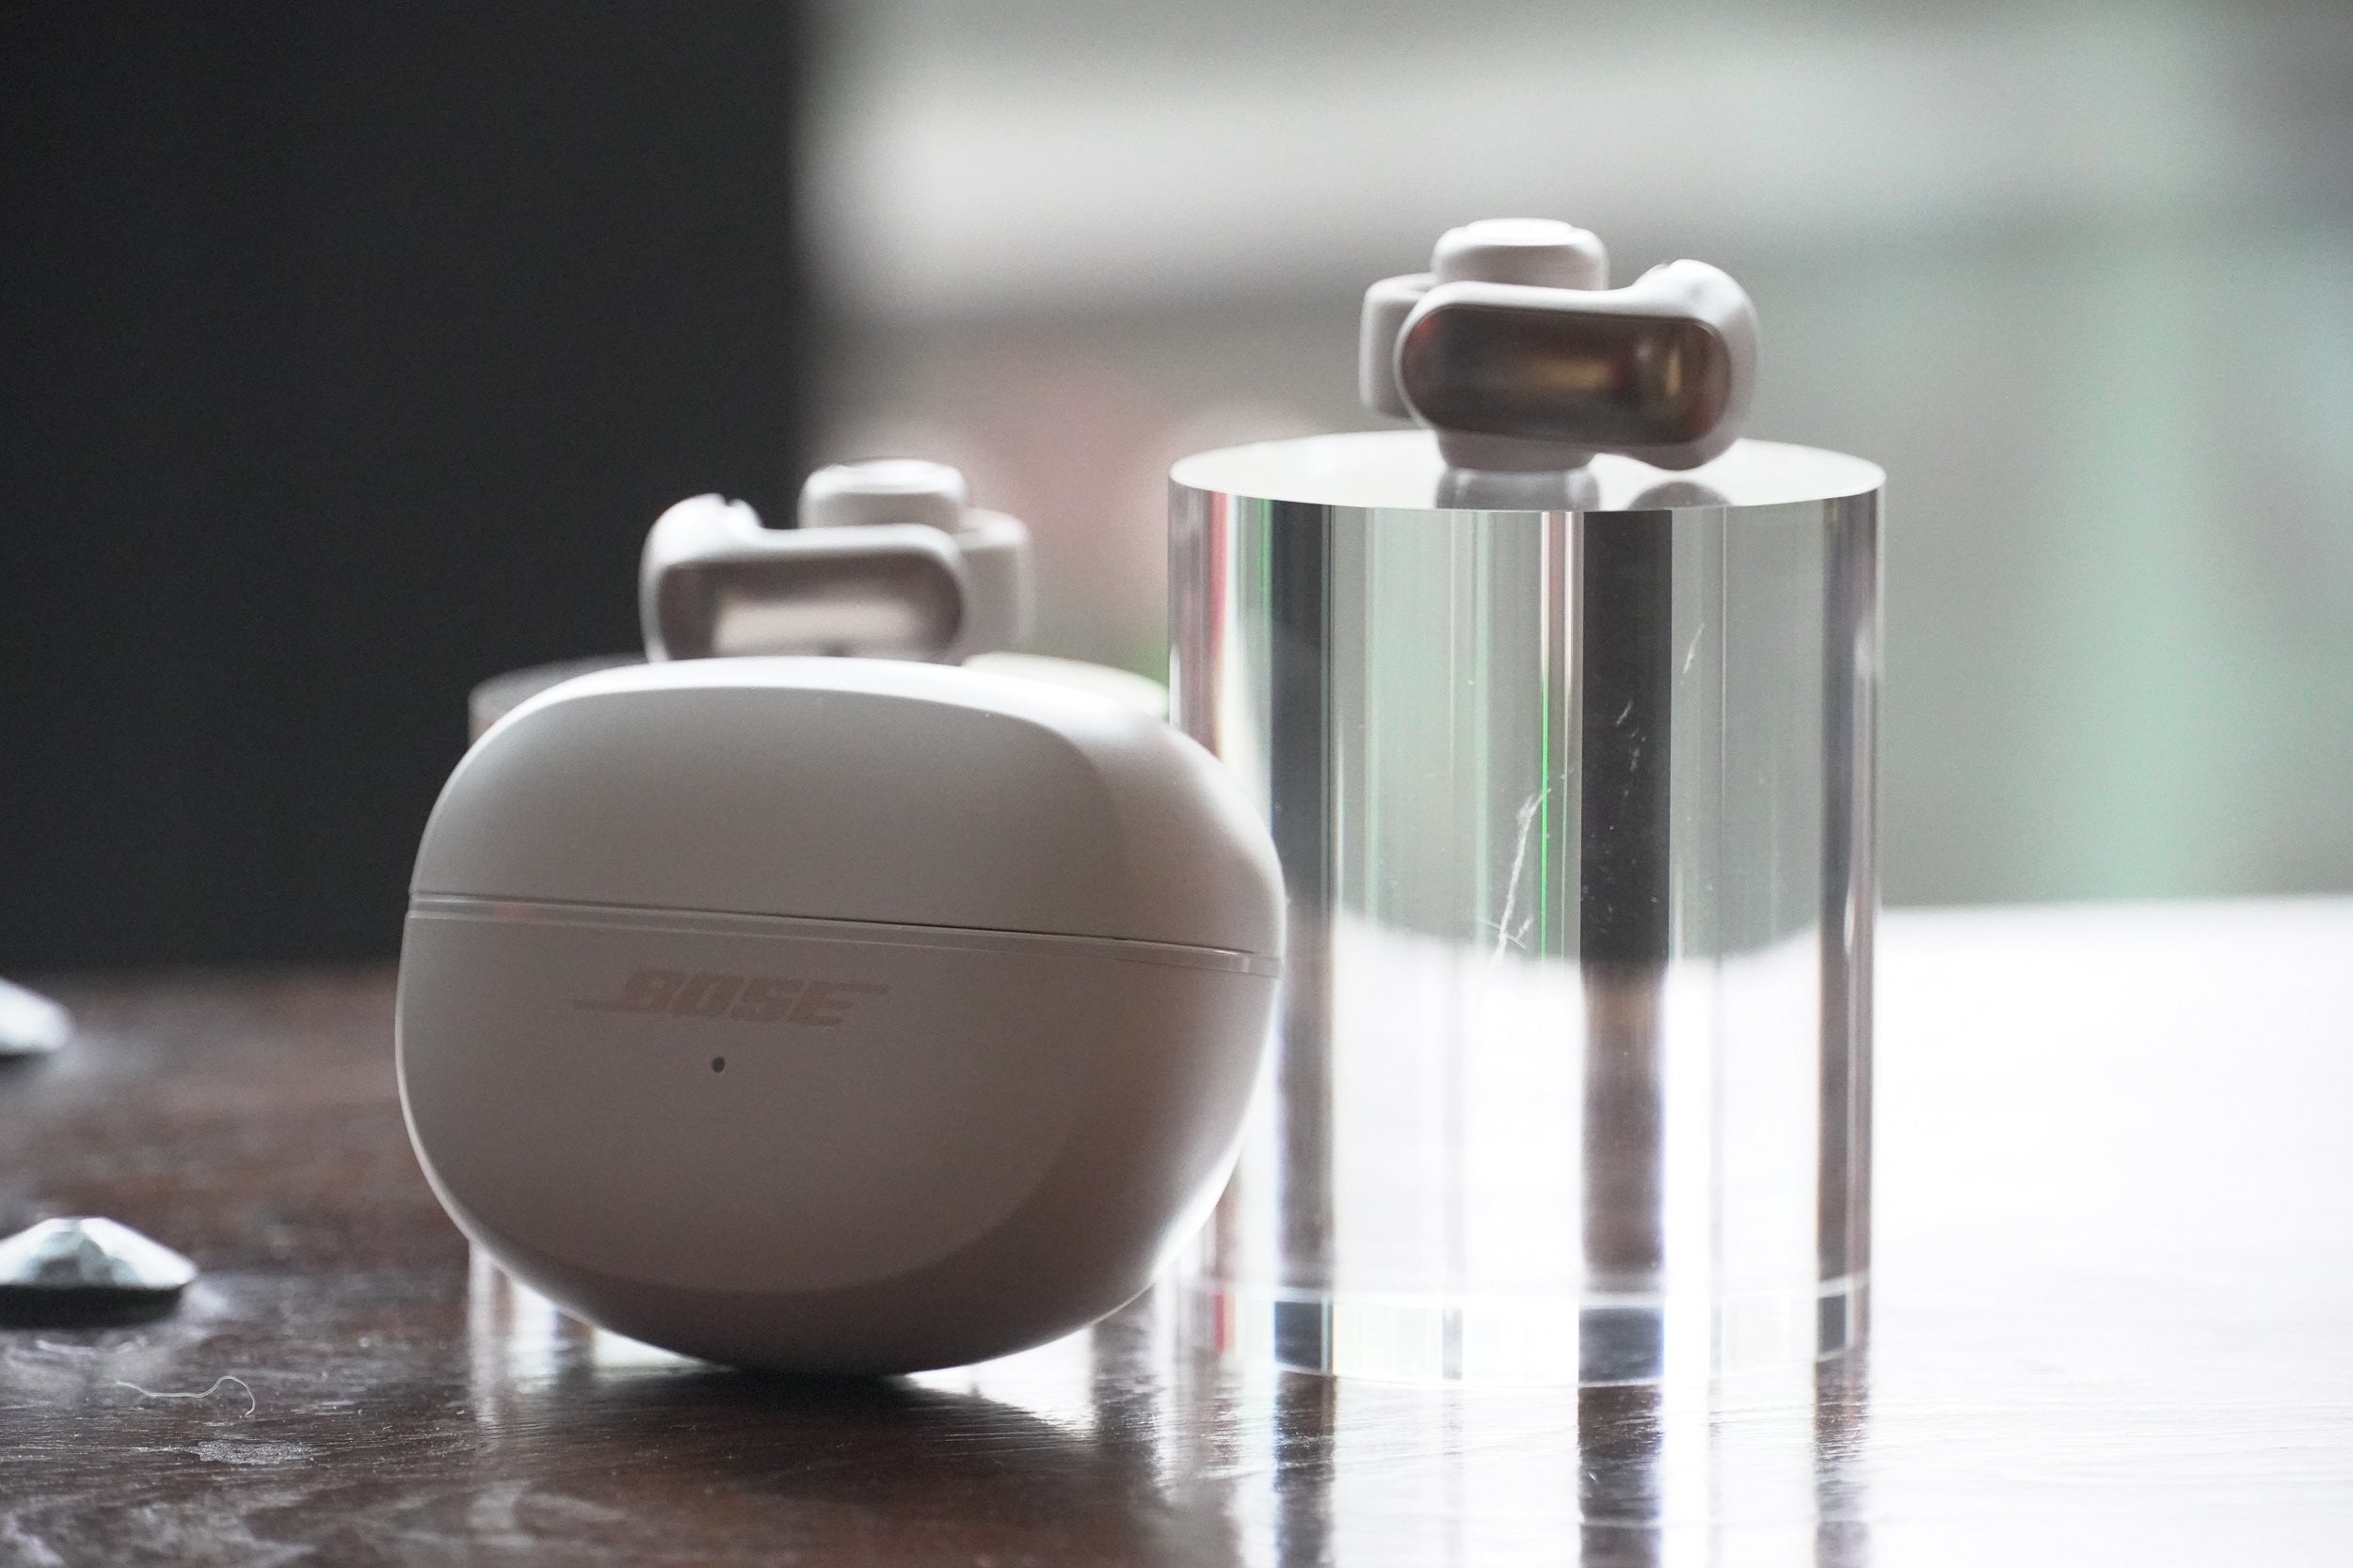 Oppo Enco Free2 review: affordable yet feature-packed true wireless earbuds